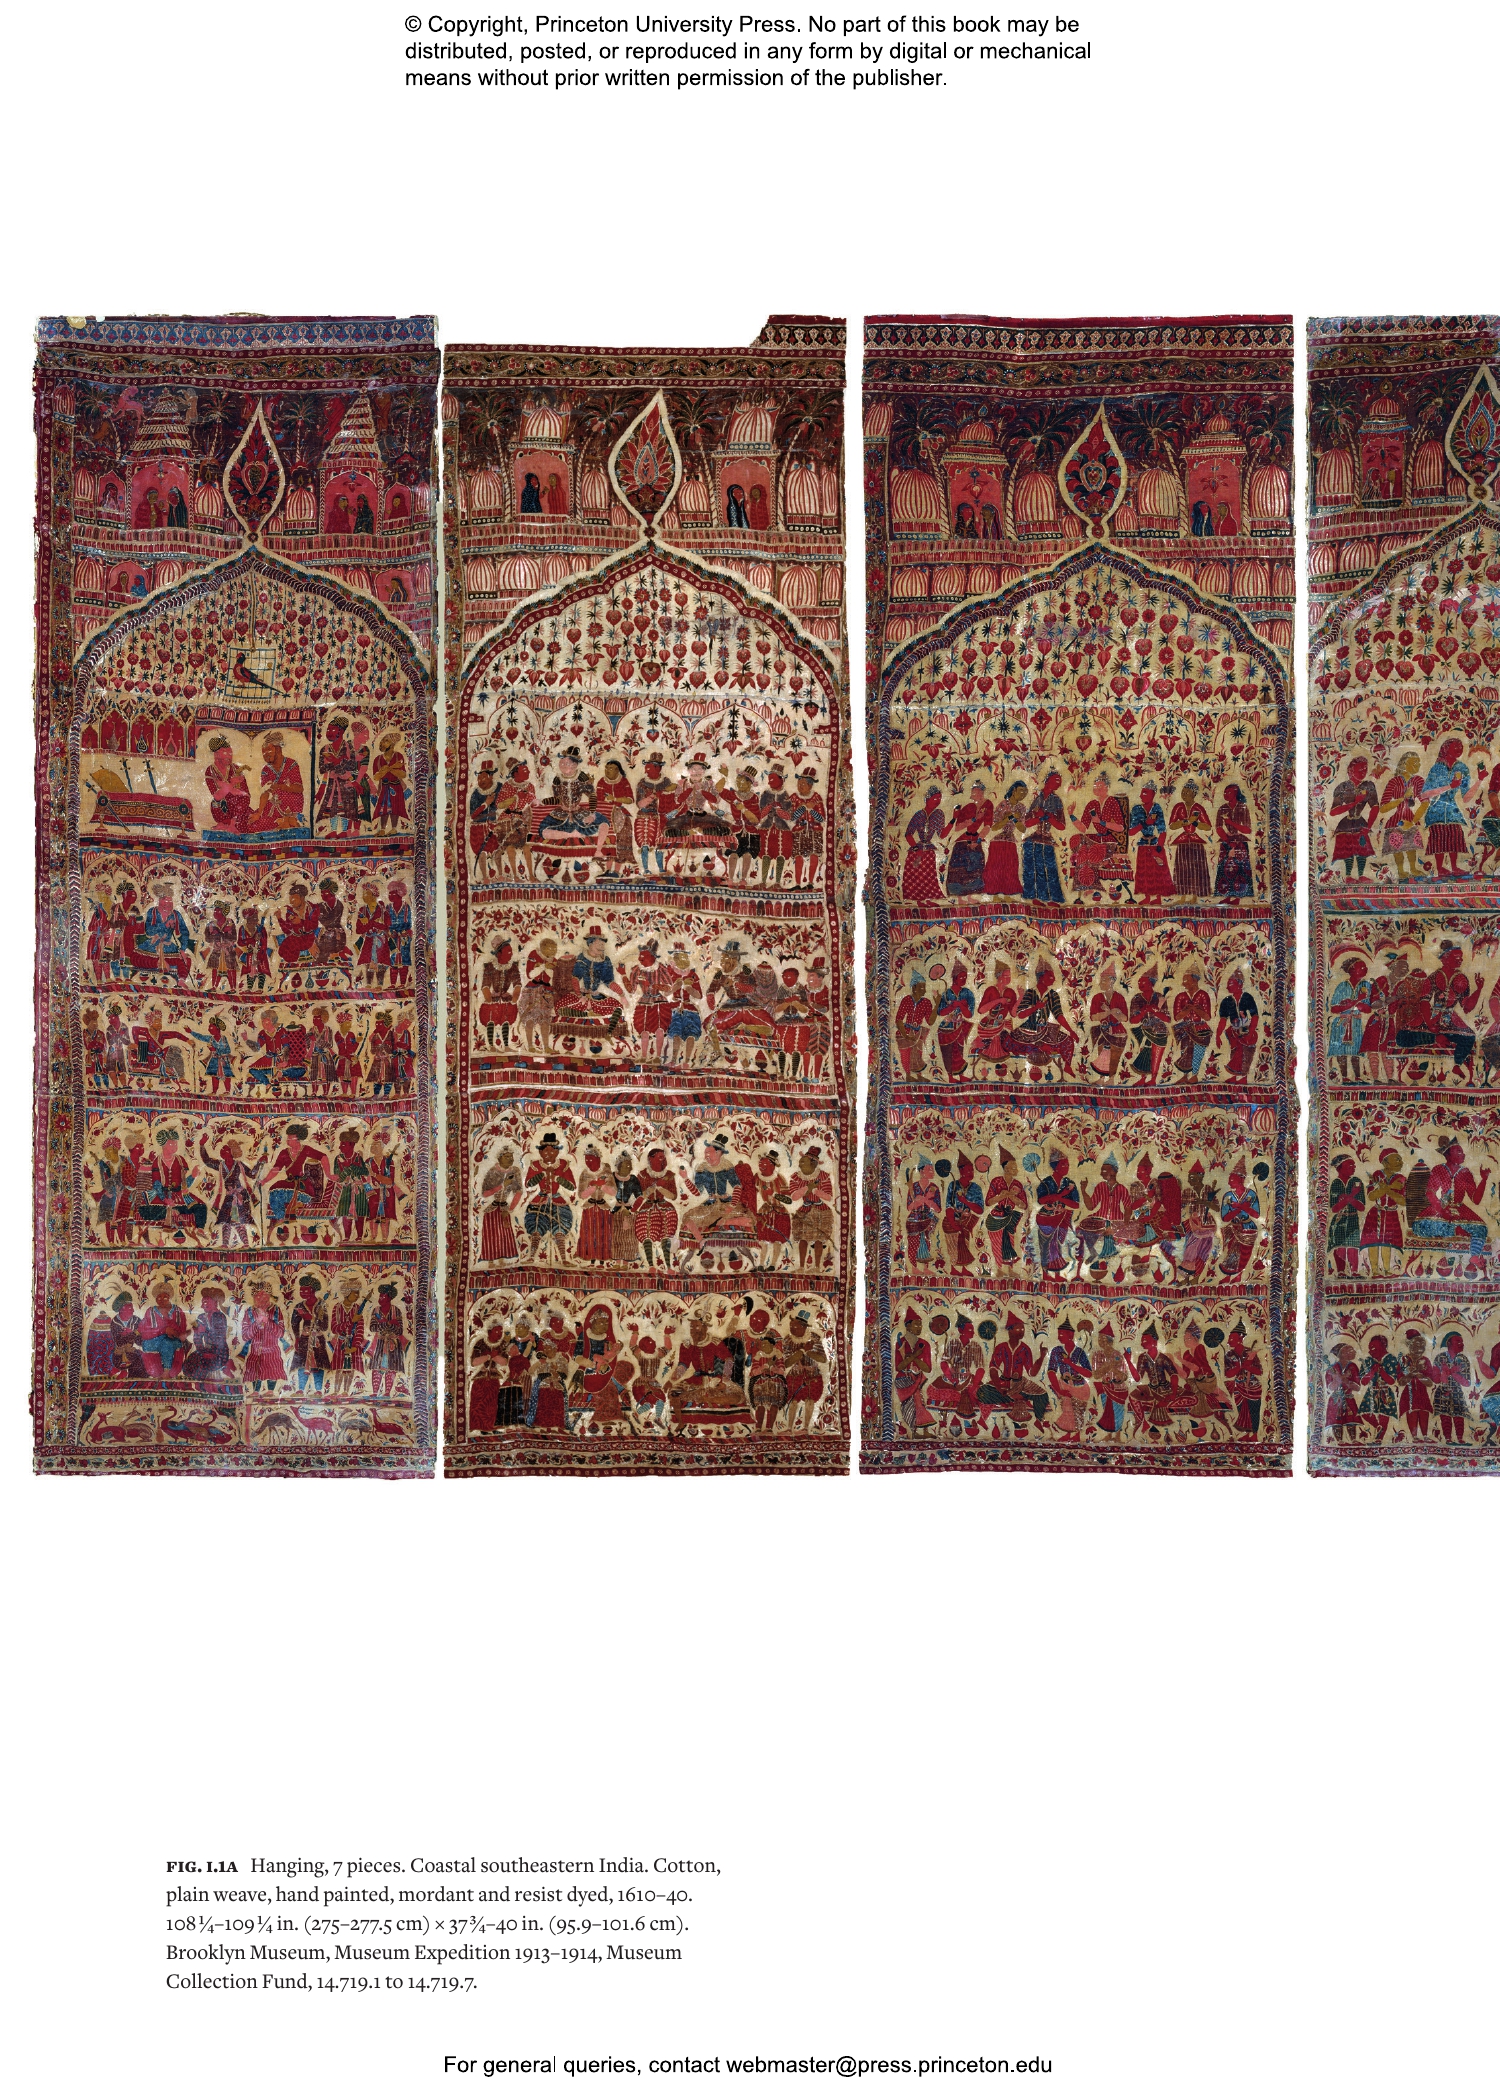 The Art of Cloth in Mughal India